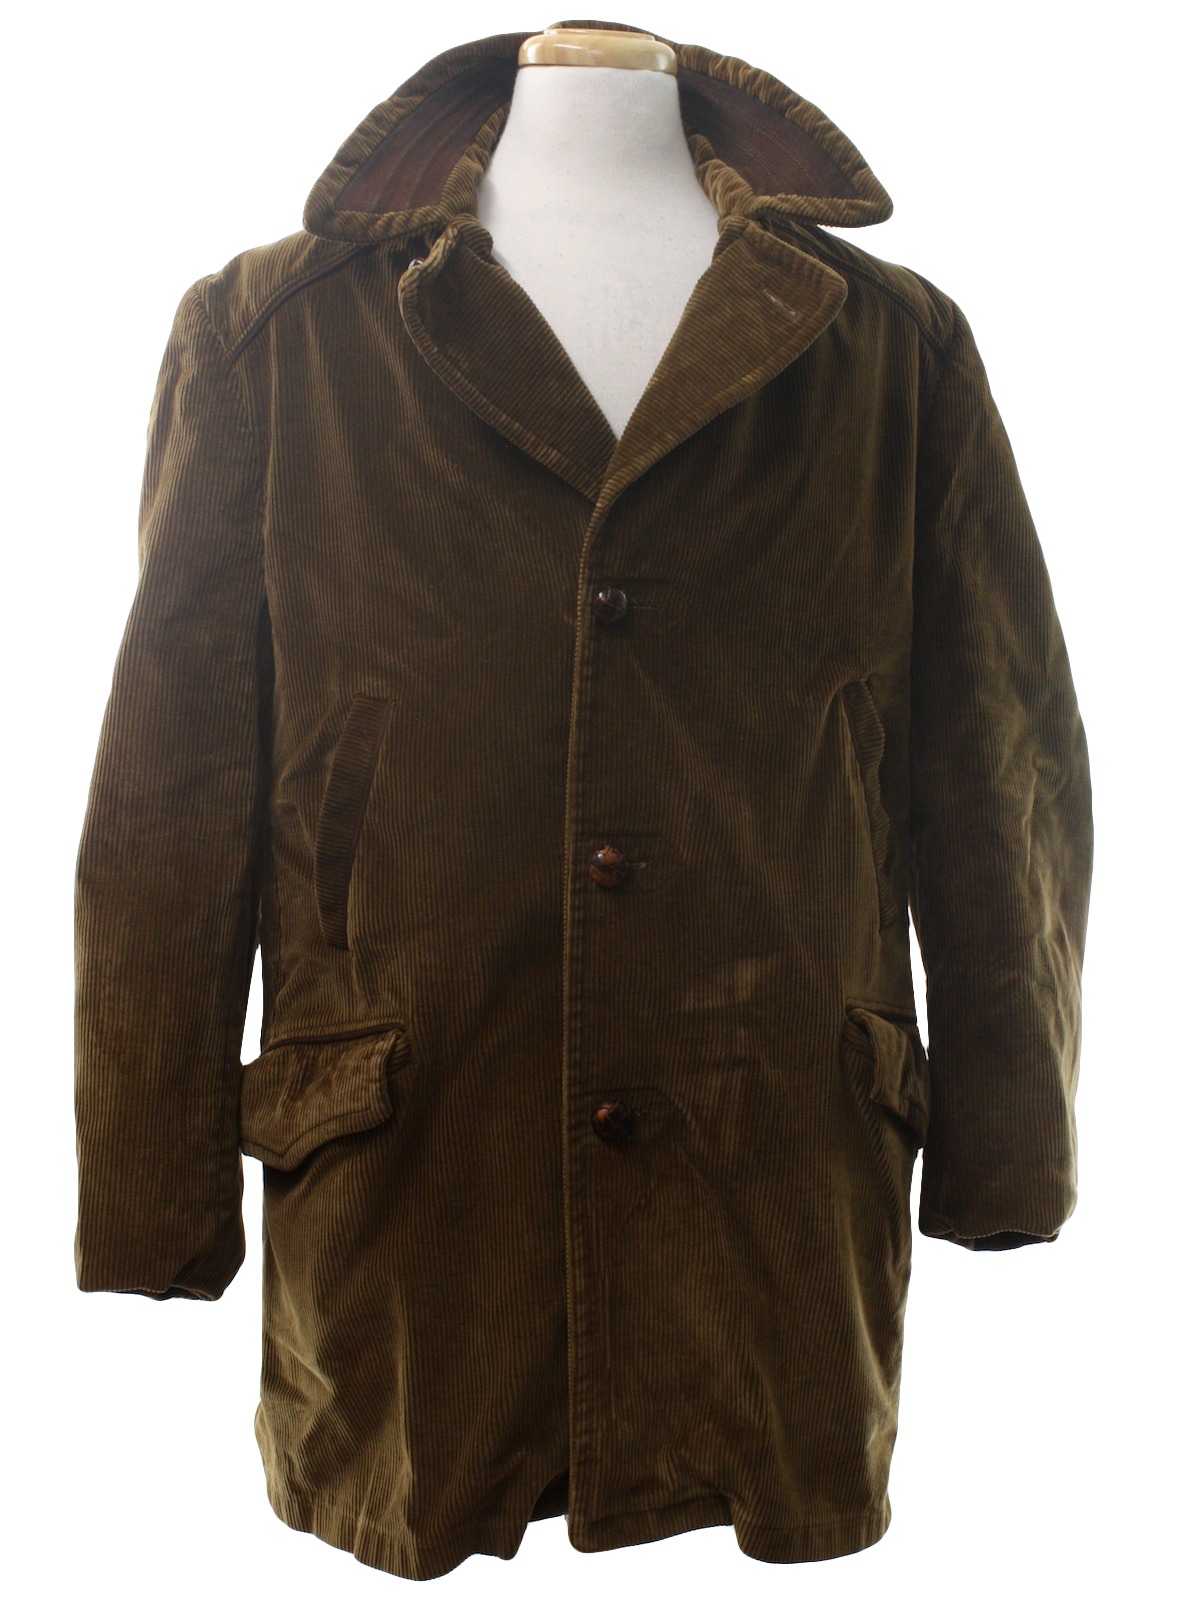 The Country Coat Sears Sixties Vintage Jacket: 60s -The Country Coat ...